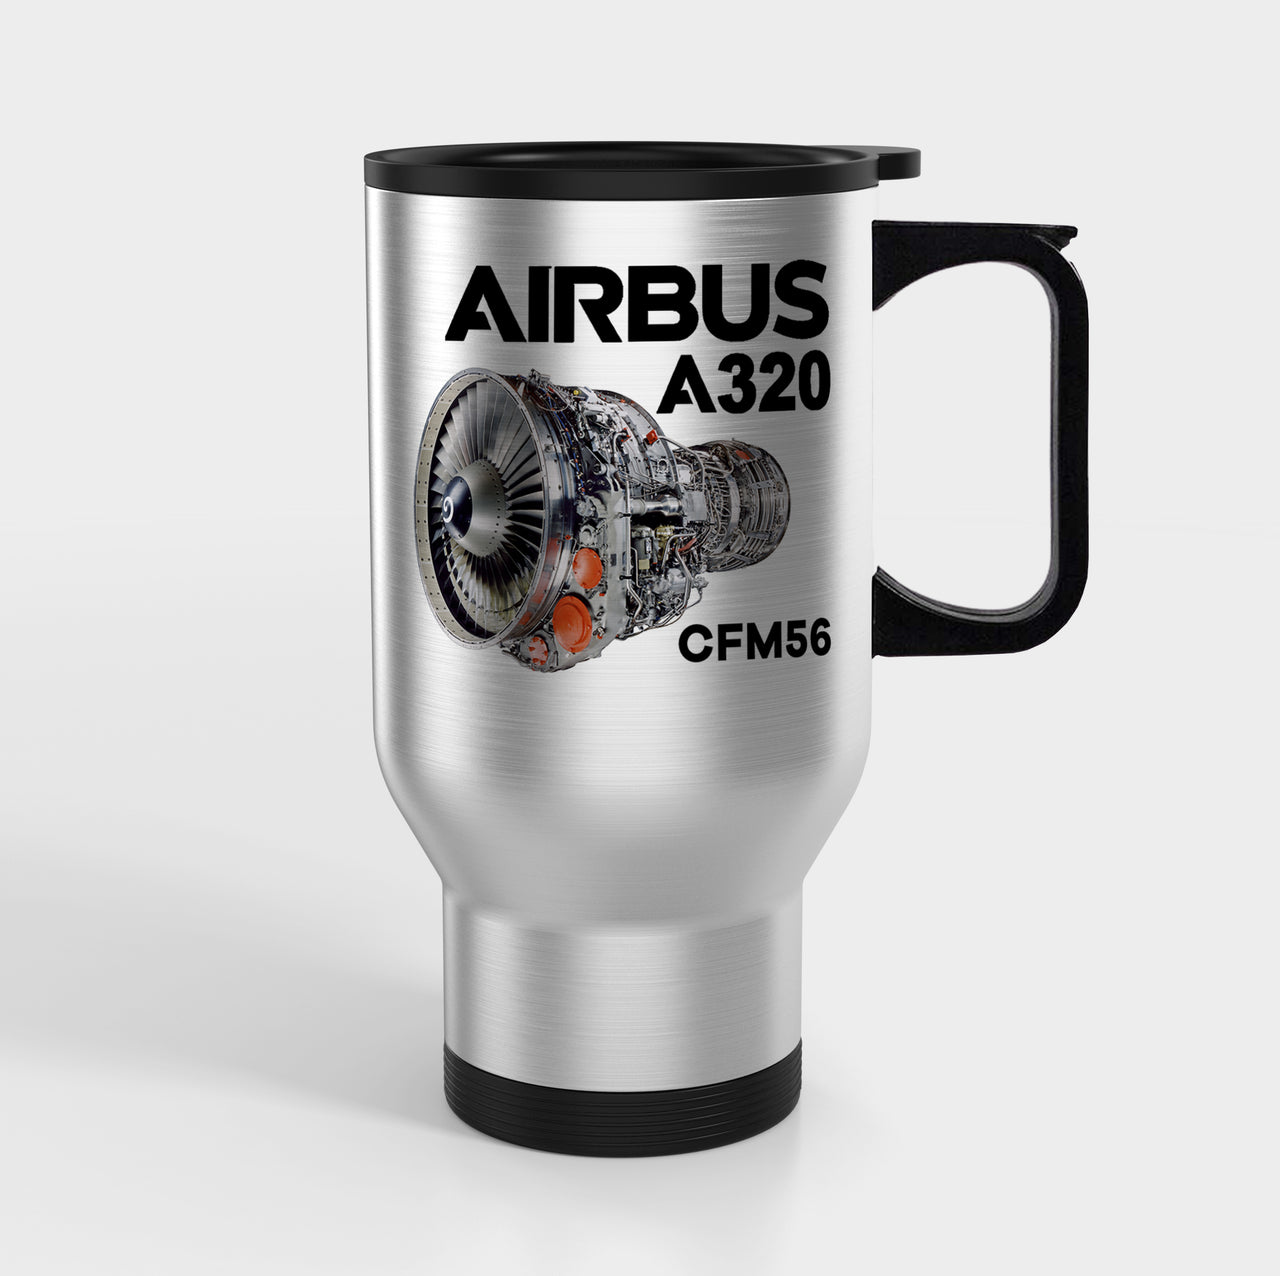 Airbus A320 & CFM56 Engine Designed Travel Mugs (With Holder)